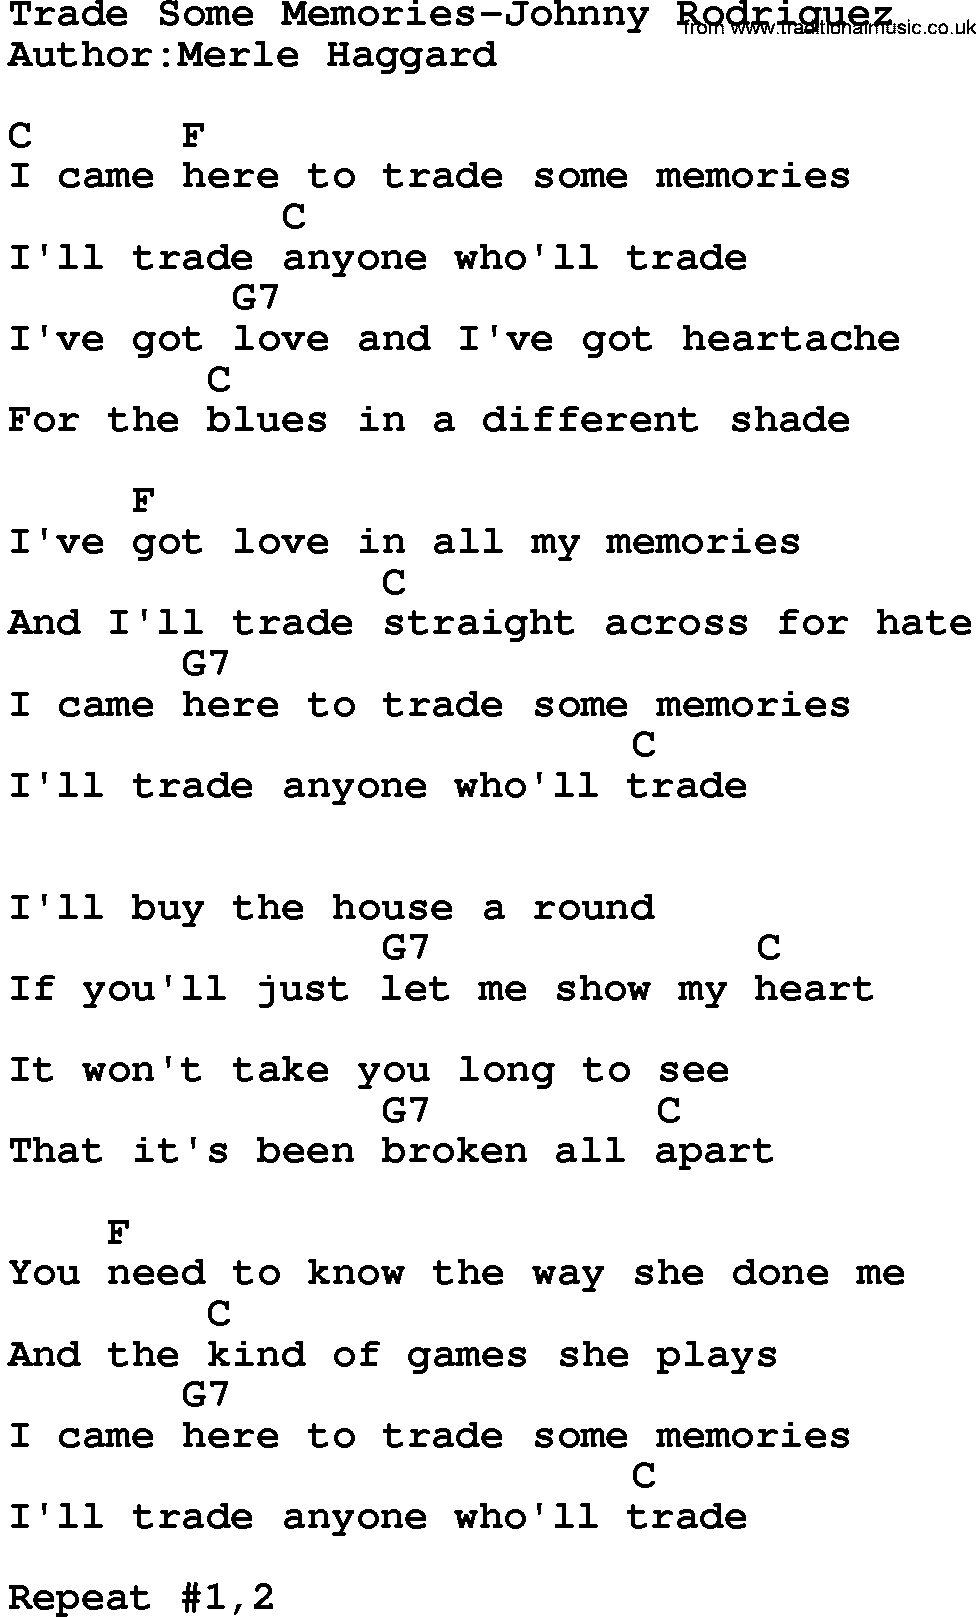 Country music song: Trade Some Memories-Johnny Rodriguez lyrics and chords